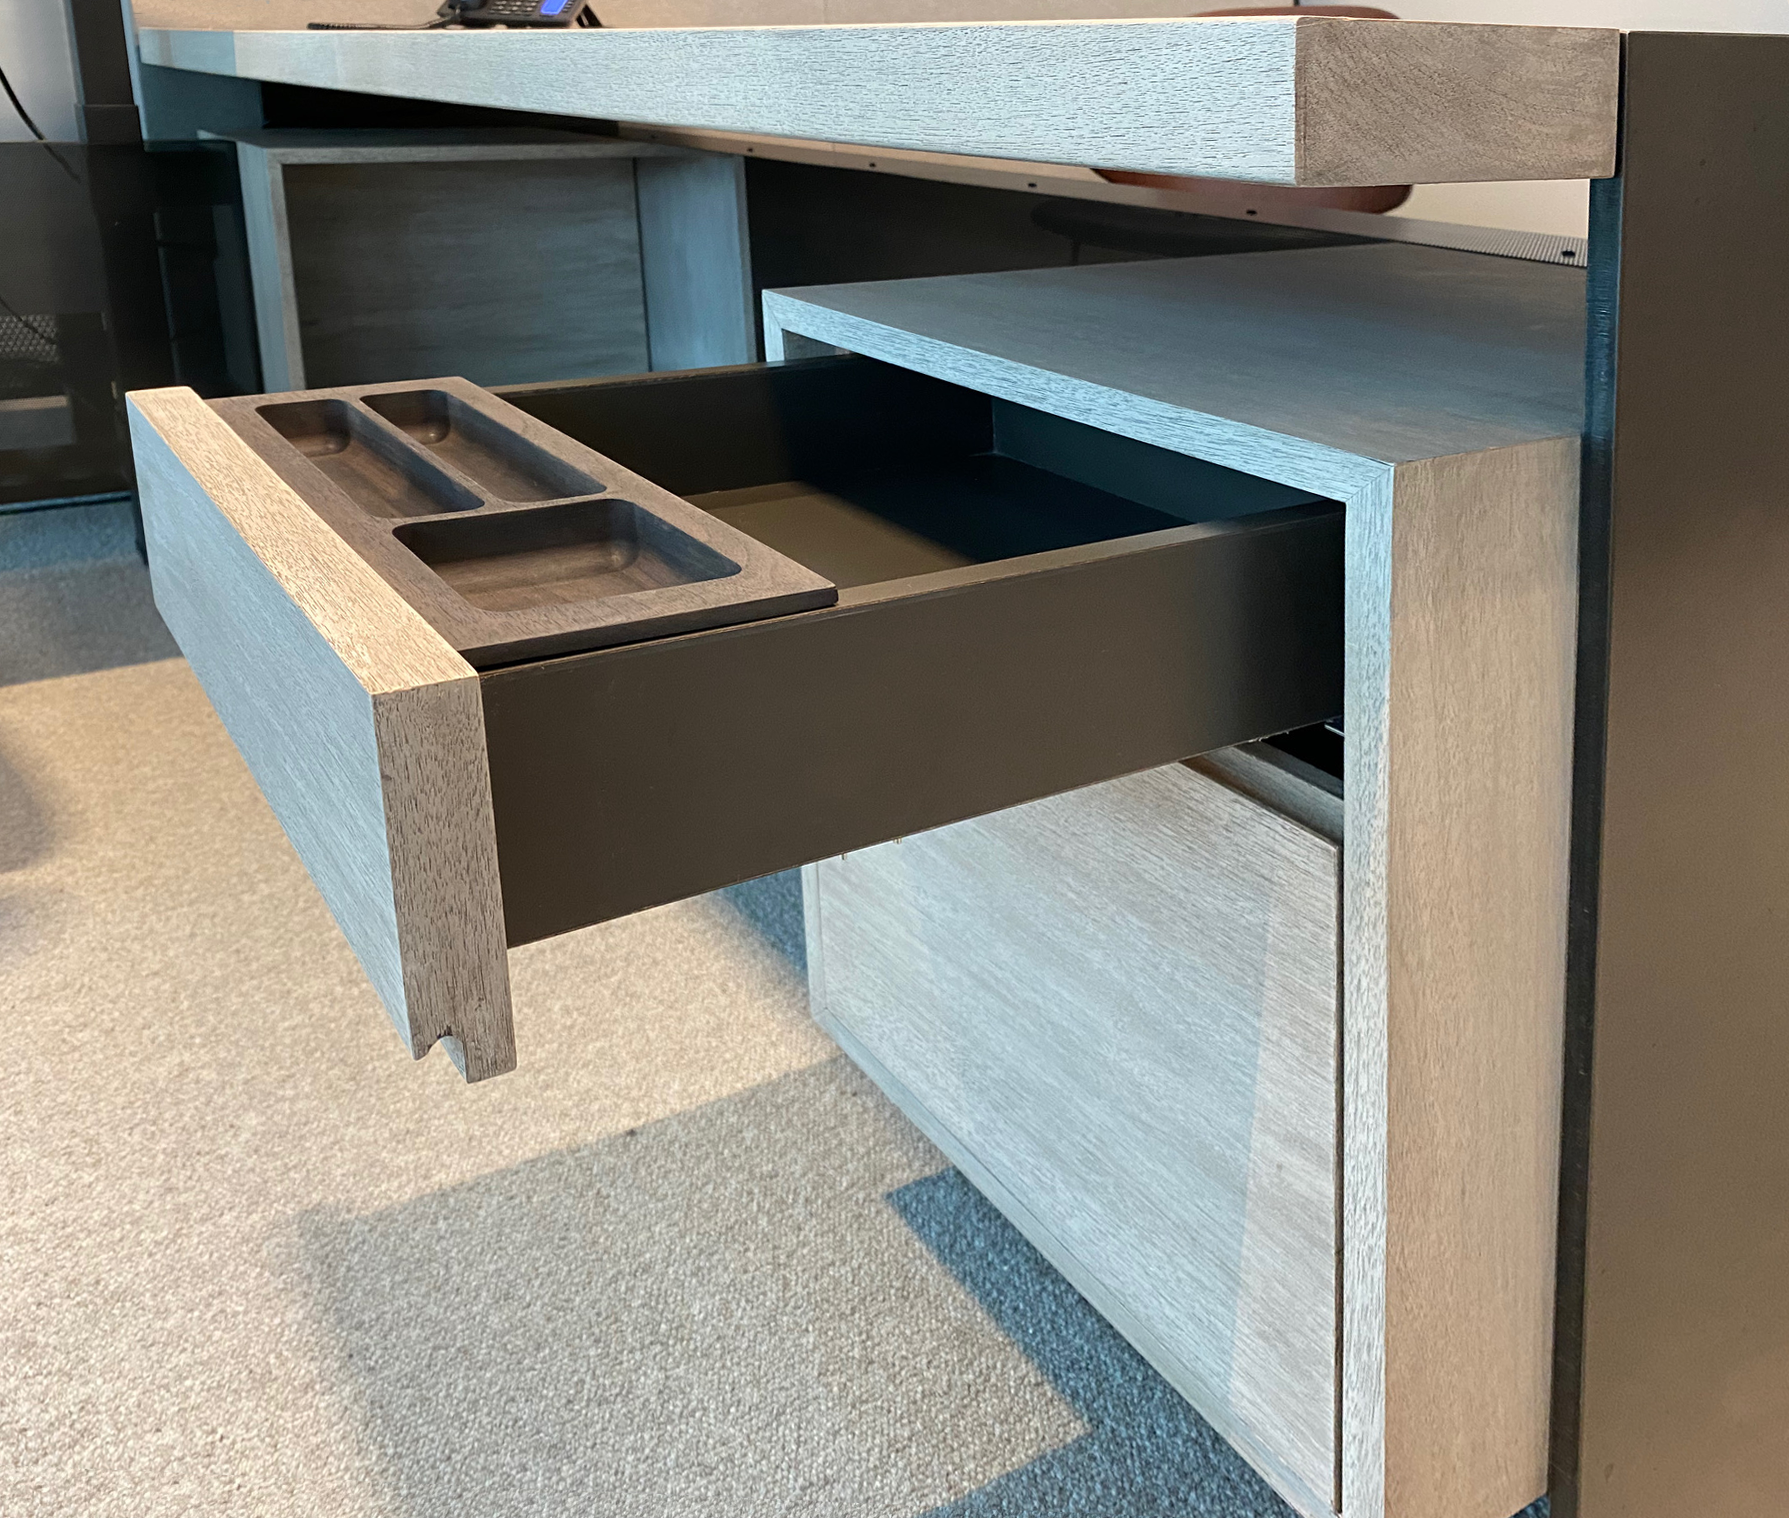 CUSTOM PENCIL TRAYS FIT AND SLIDE IN THE TOP DRAWERS OF FLOATING FILE CABINETS CONCEALED BENEATH DESK SURFACES.